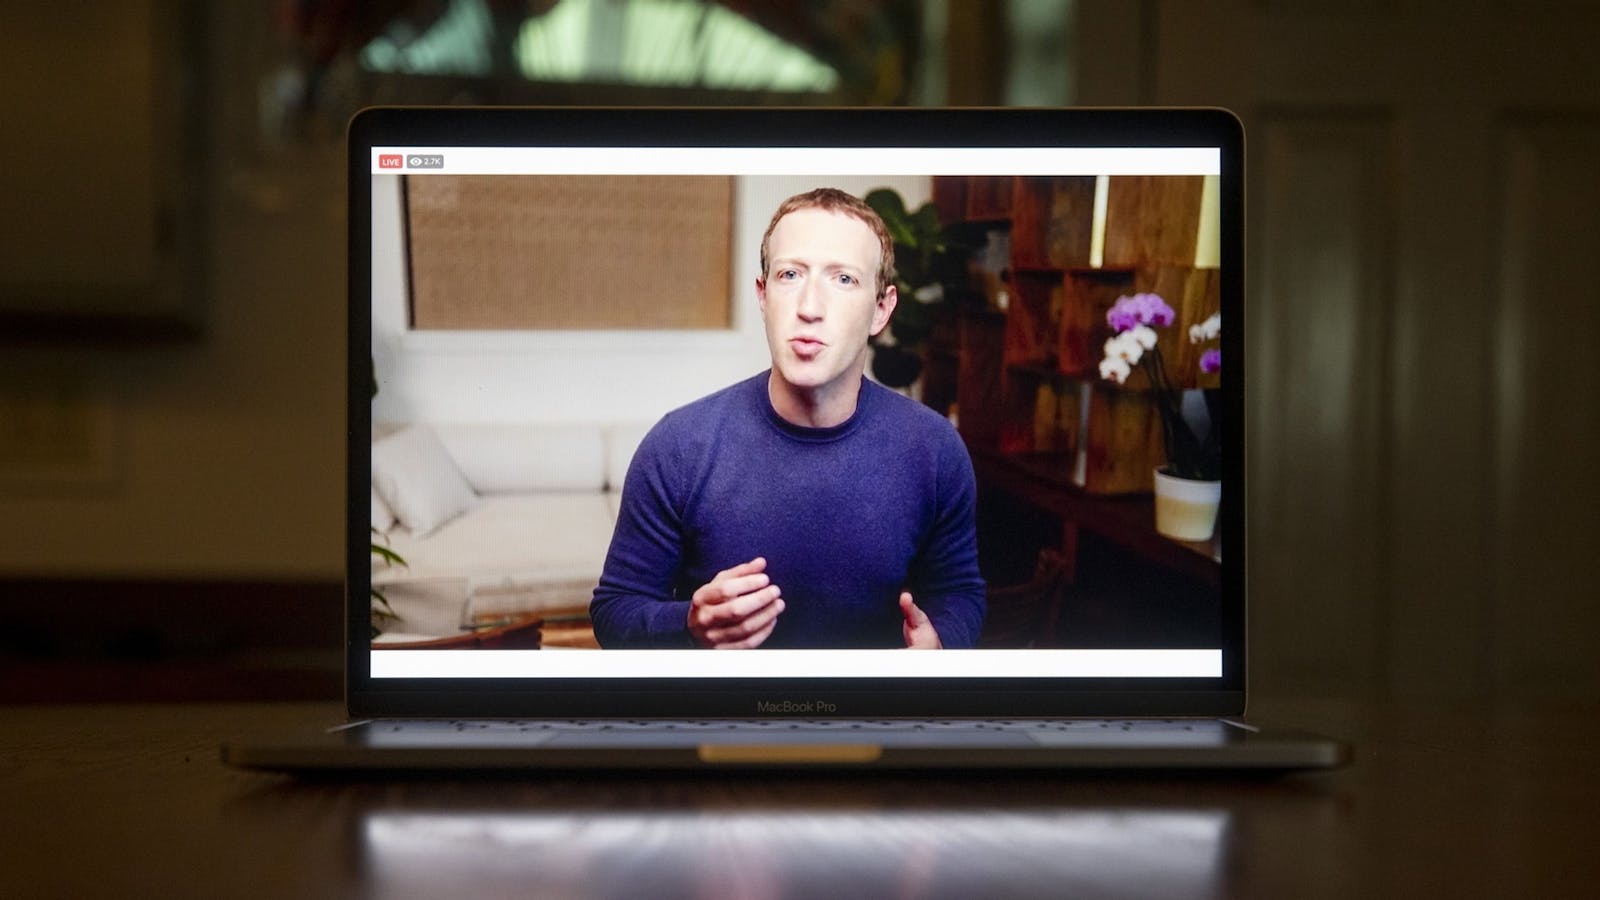 Facebook CEO Mark Zuckerberg speaks during a virtual developer conference in June. Photo by Bloomberg